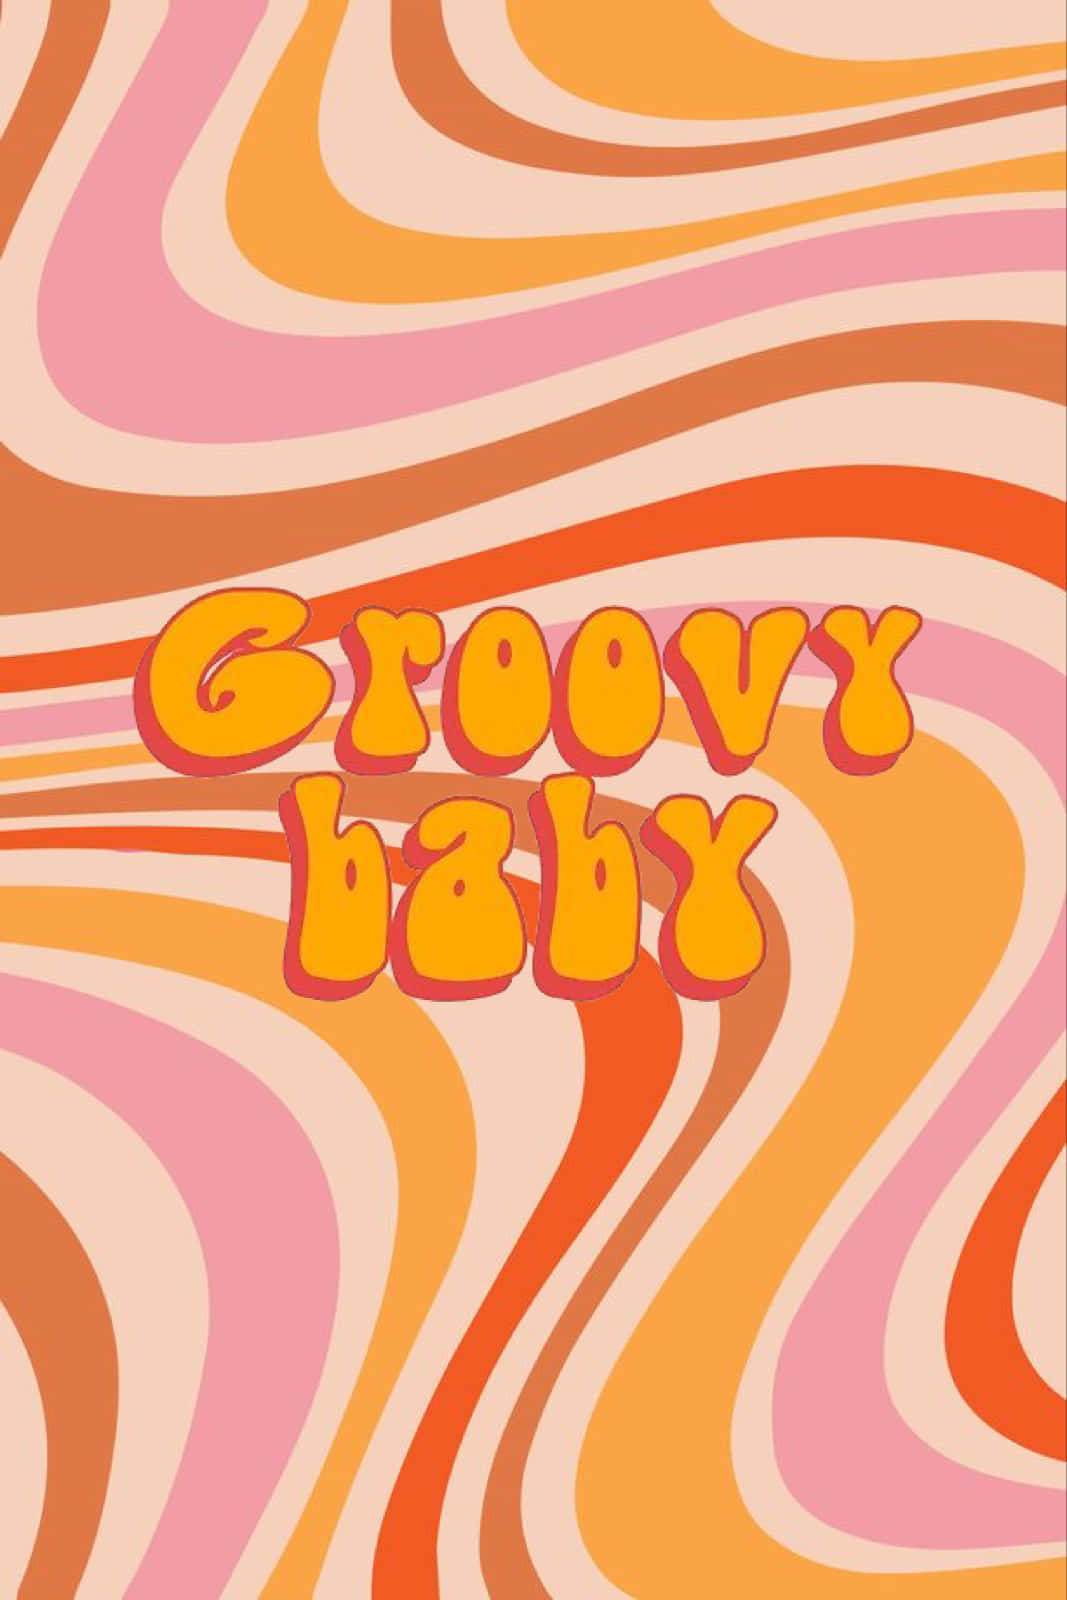 Get groovy with retro vibes Wallpaper